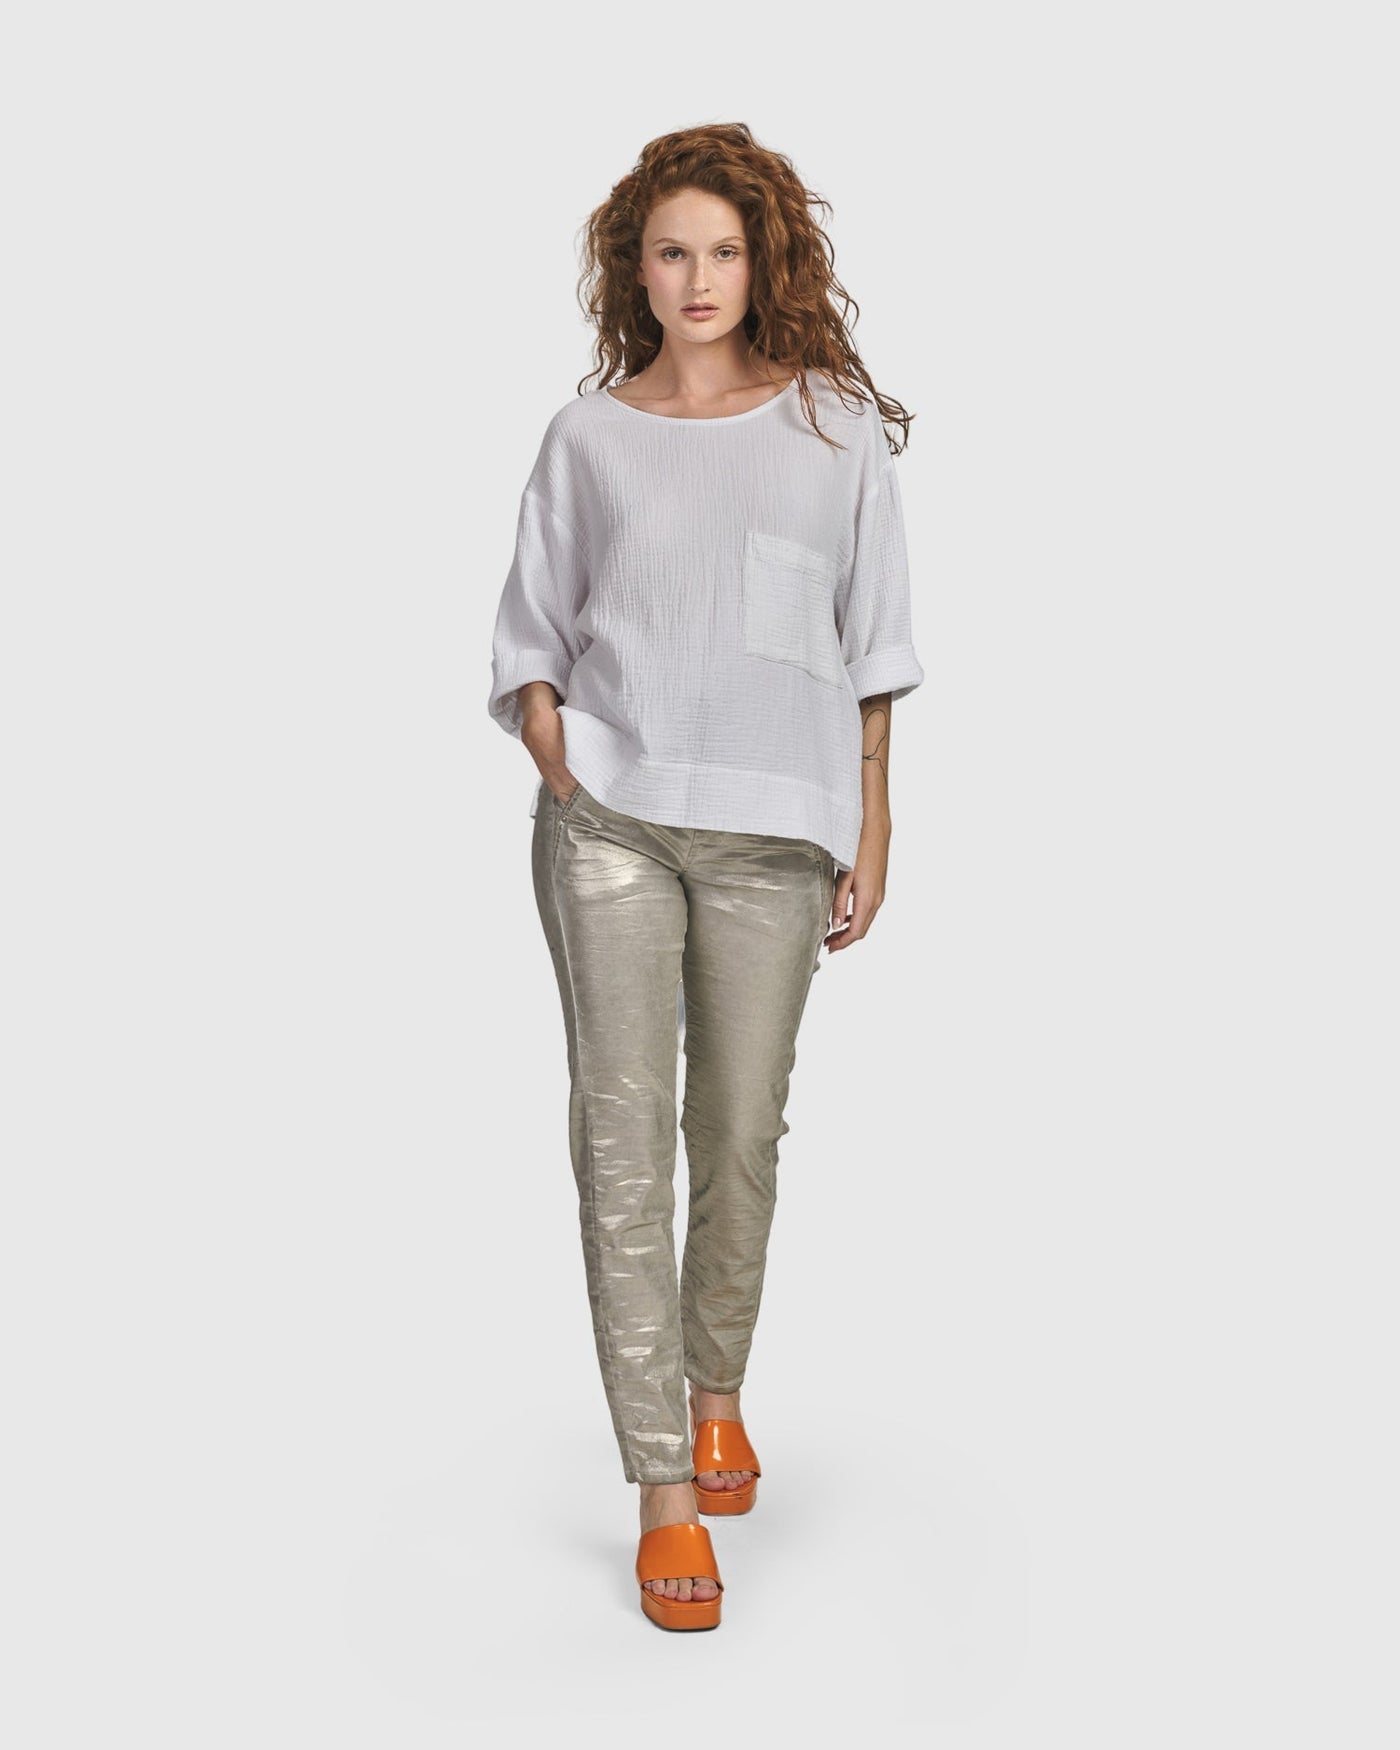 A woman wearing a white shirt and Iconic Stretch Jeans with a drawstring stretch waist by ALEMBIKA.